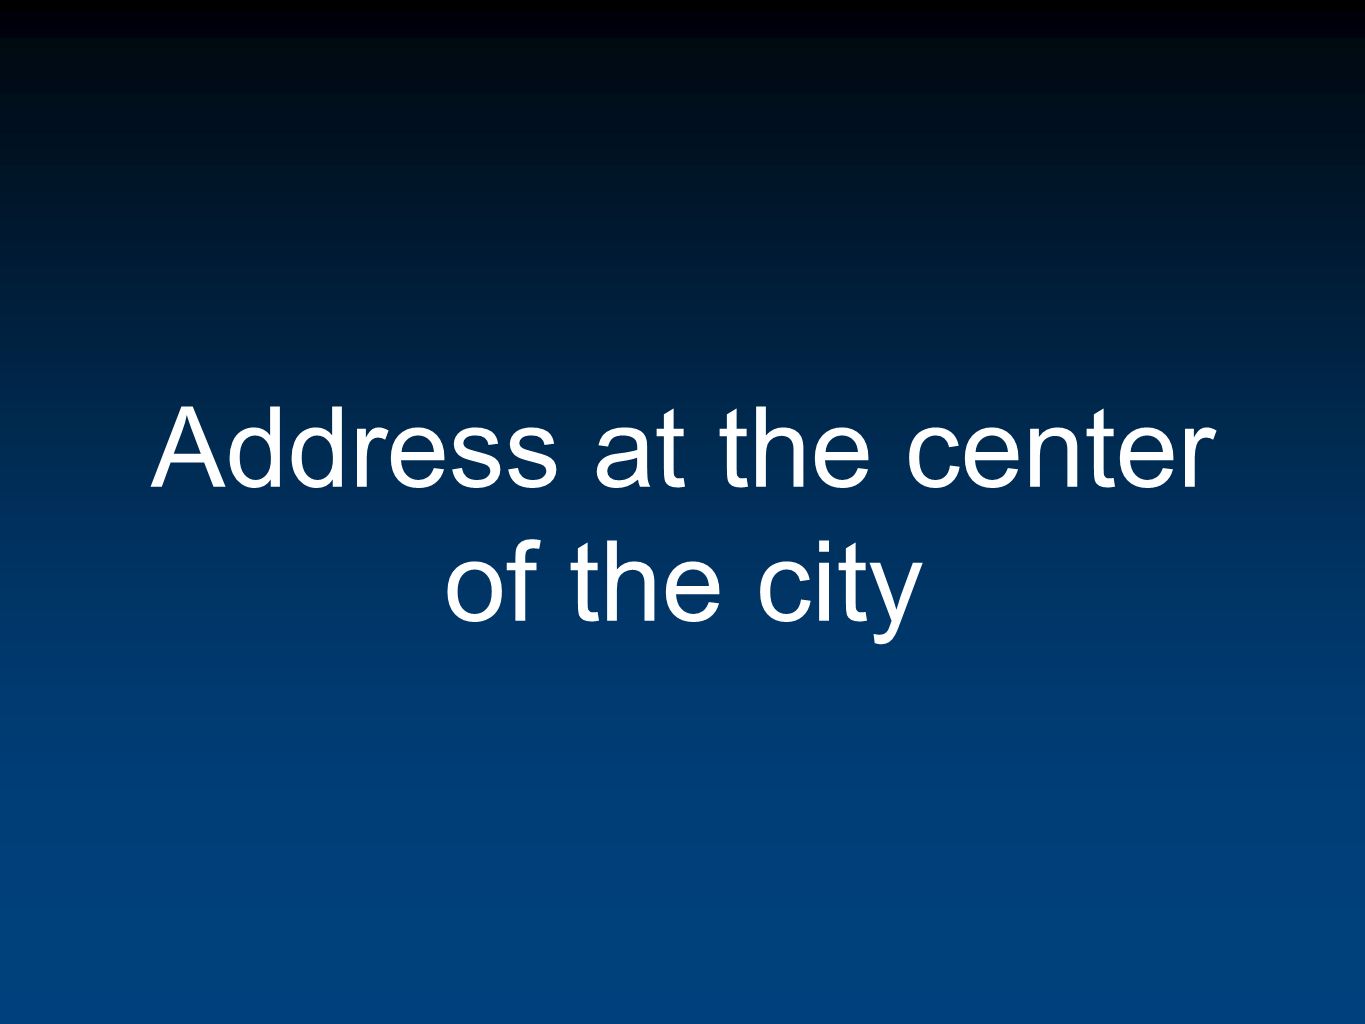 Address at the center of the city